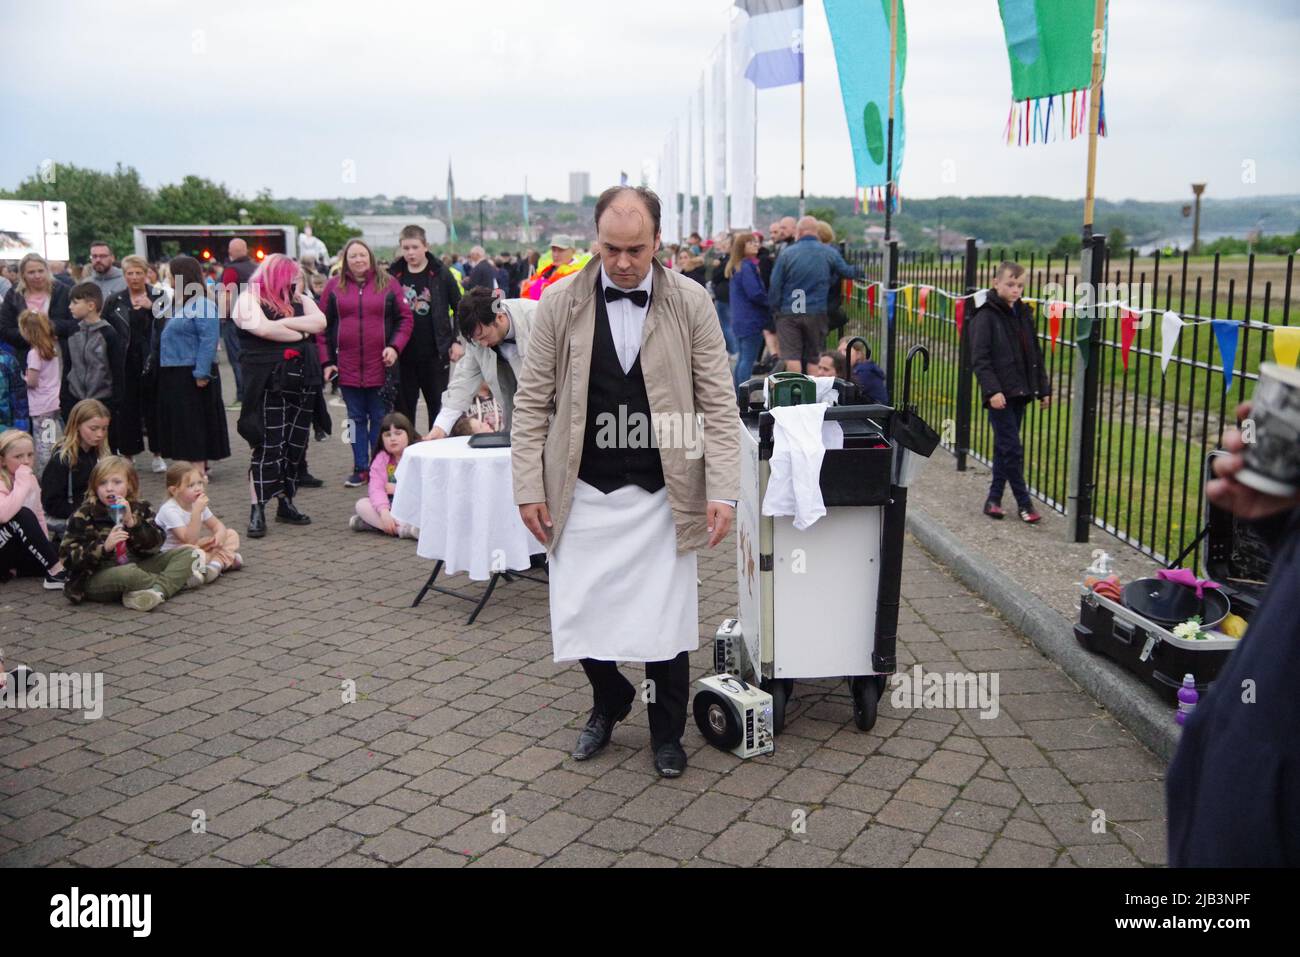 Wallsend, England, 2 June 2022. Street performers during the Queen’s Platinum Jubilee event at Segedunum Roman Fort. Credit: Colin Edwards / Alamy Live News Stock Photo